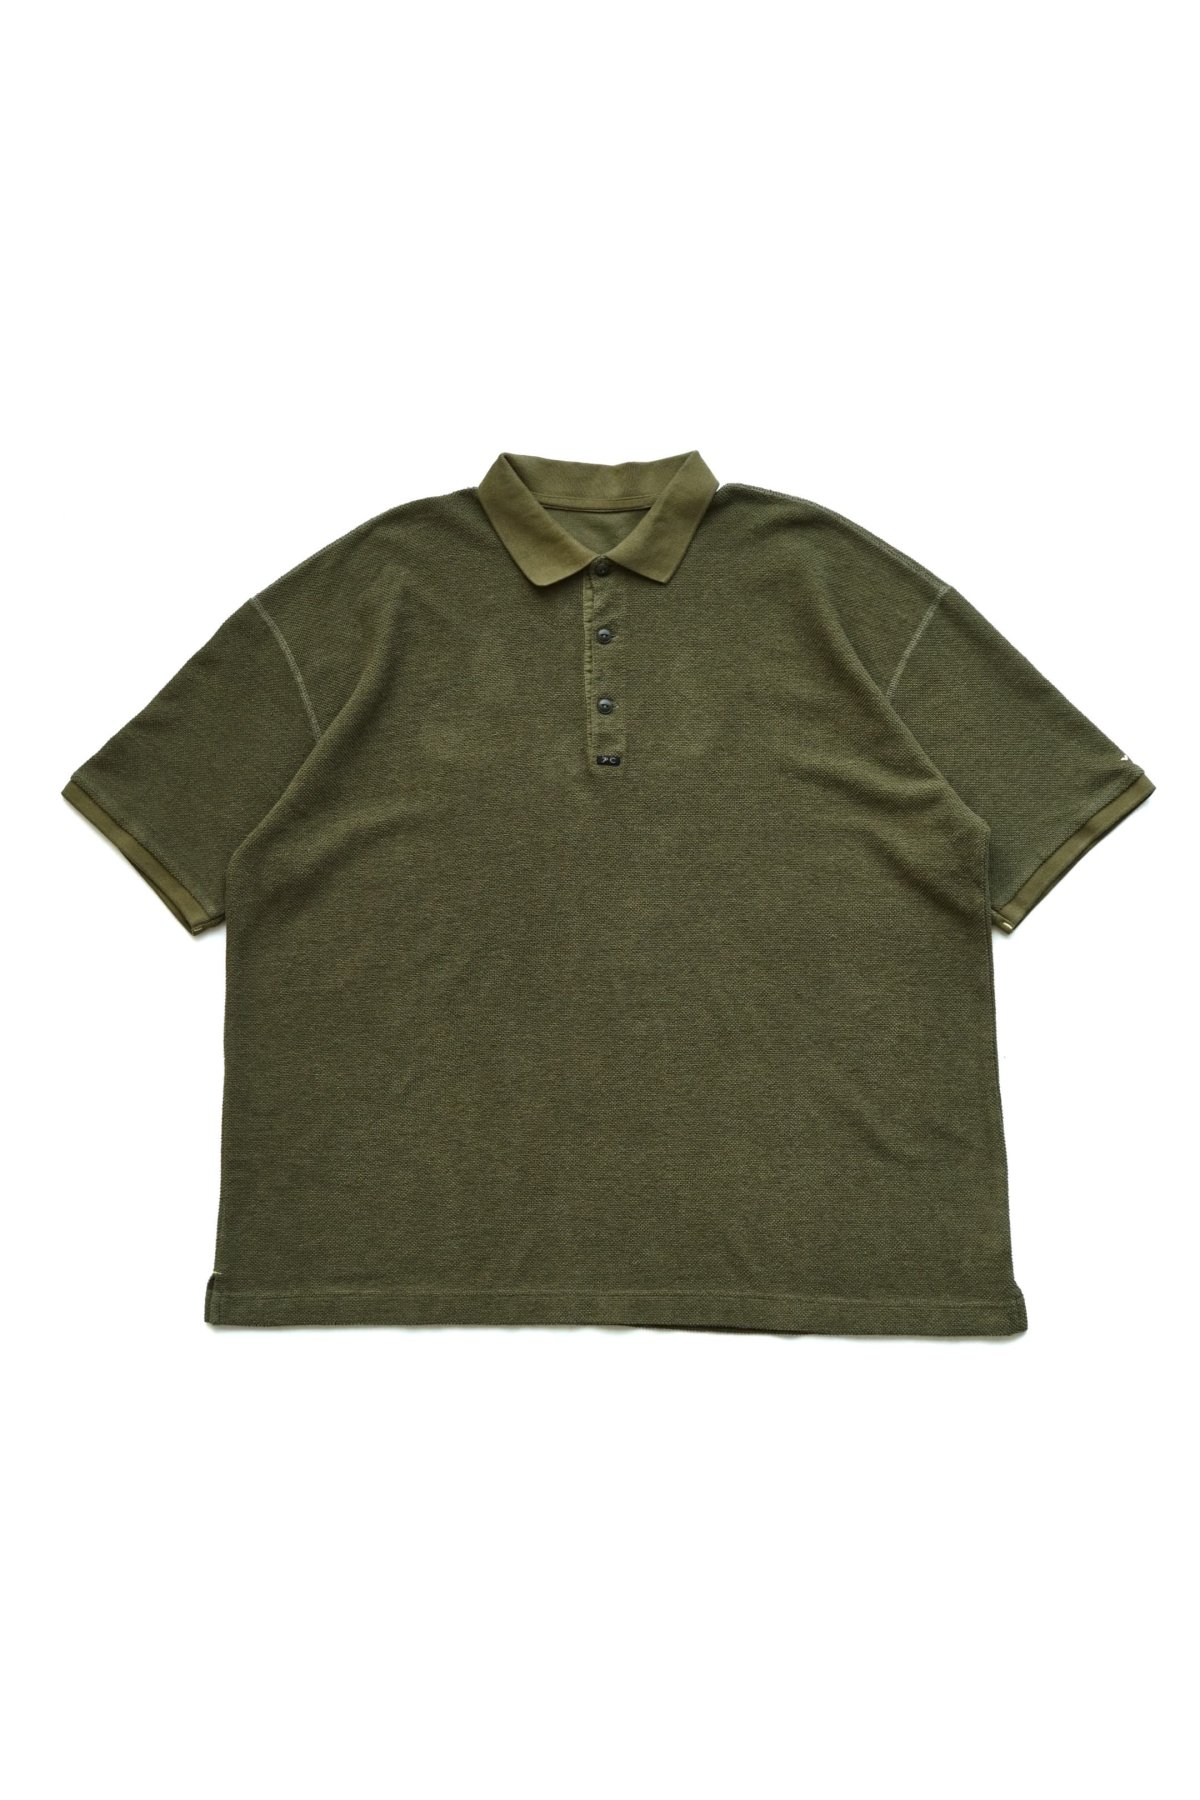 Porter Classic - SUMMER PILE POLO SHIRT - OLIVE ポータークラシック